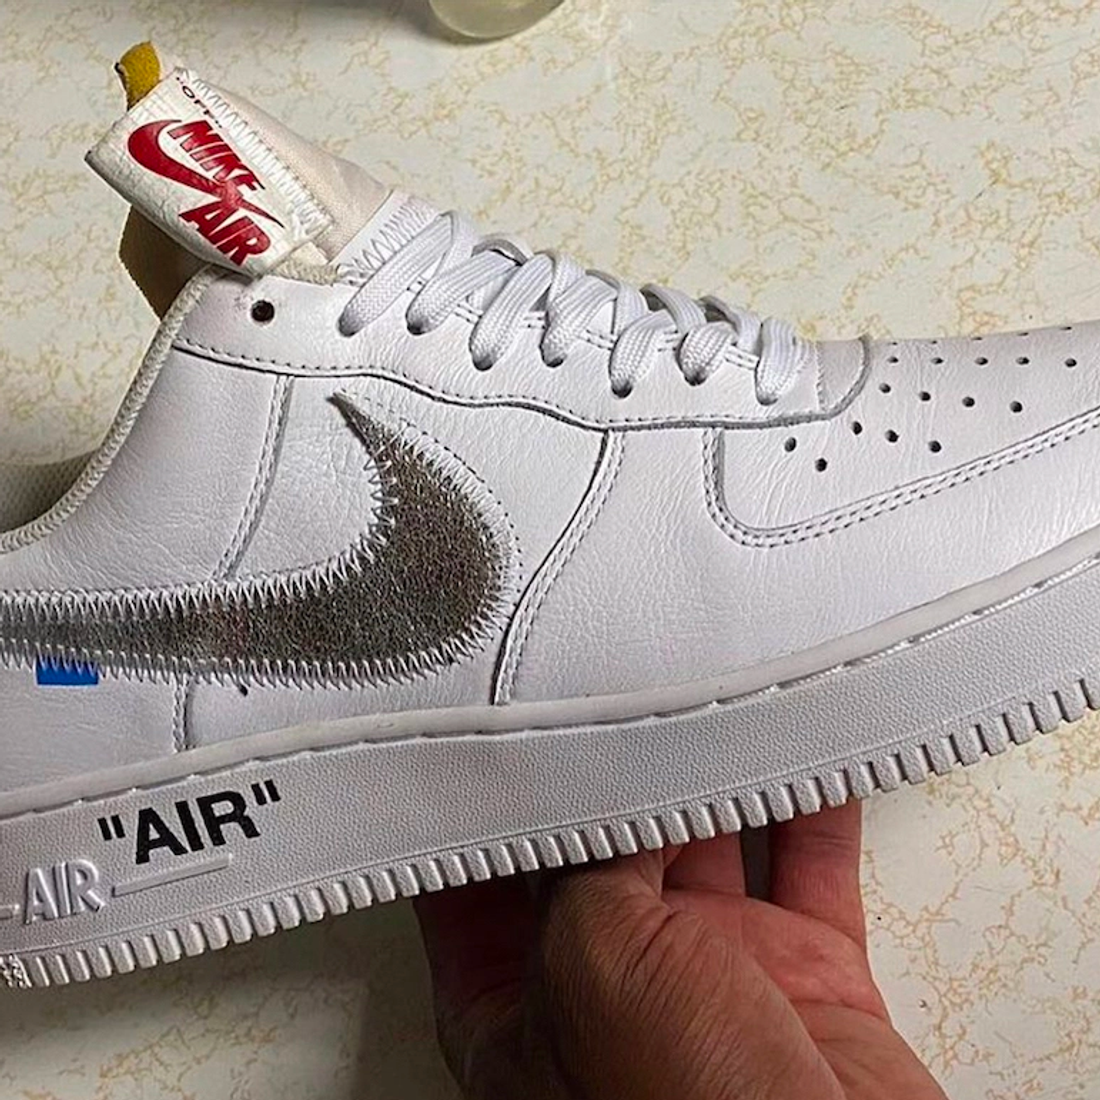 Unreleased Off-White x Nike Air Force 1 Samples on Display at